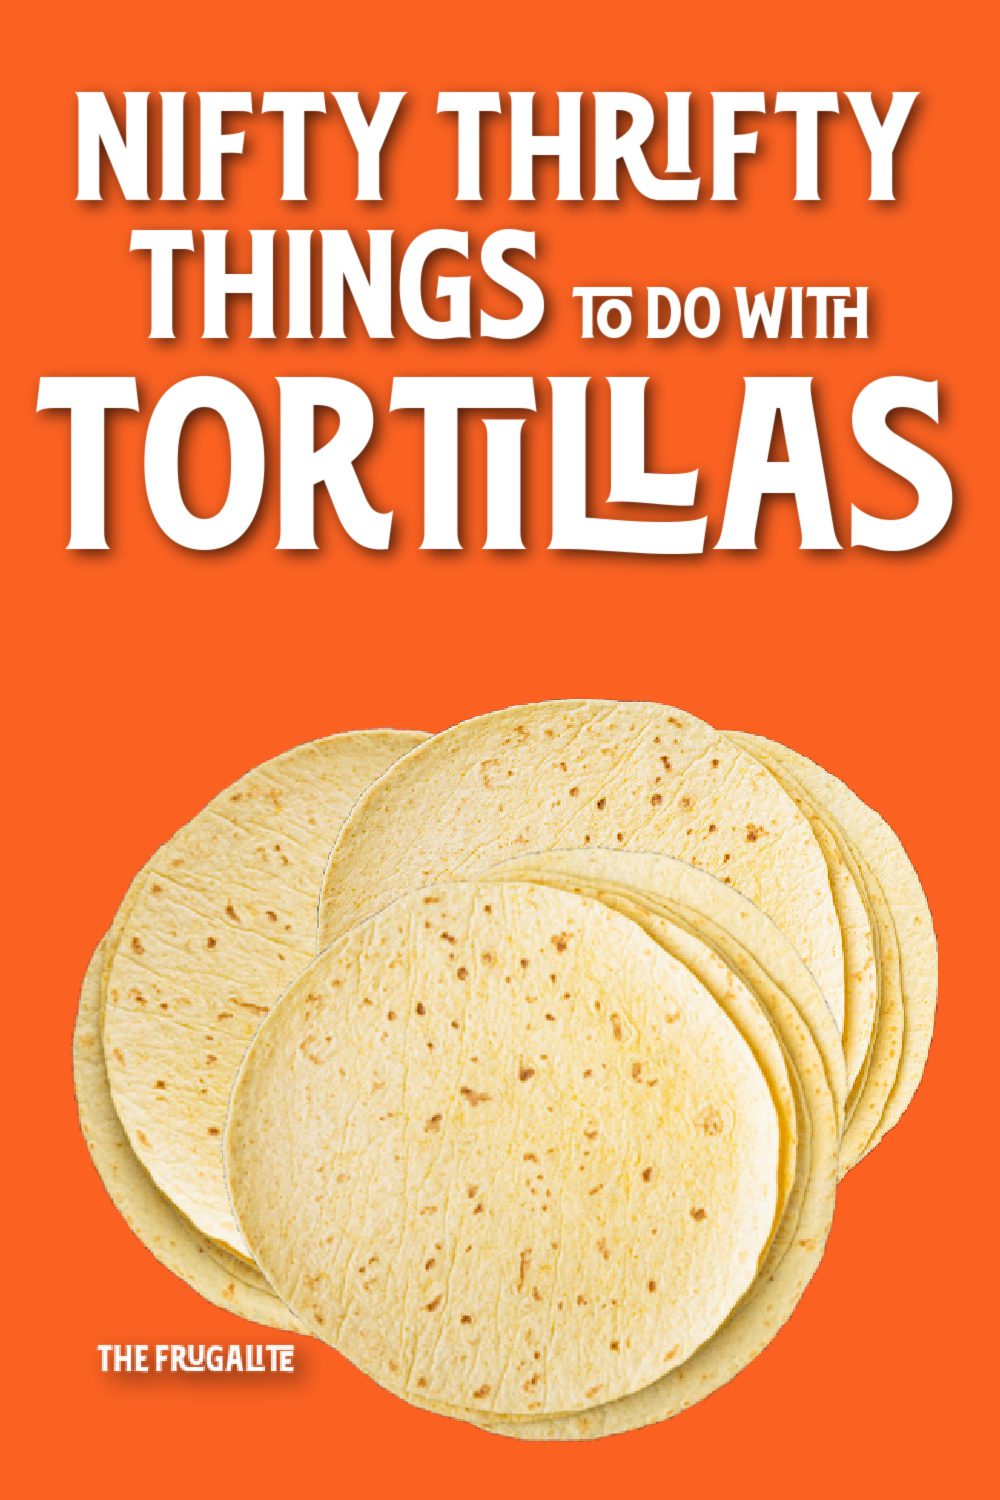 Nifty Thrifty Things to Do with Tortillas